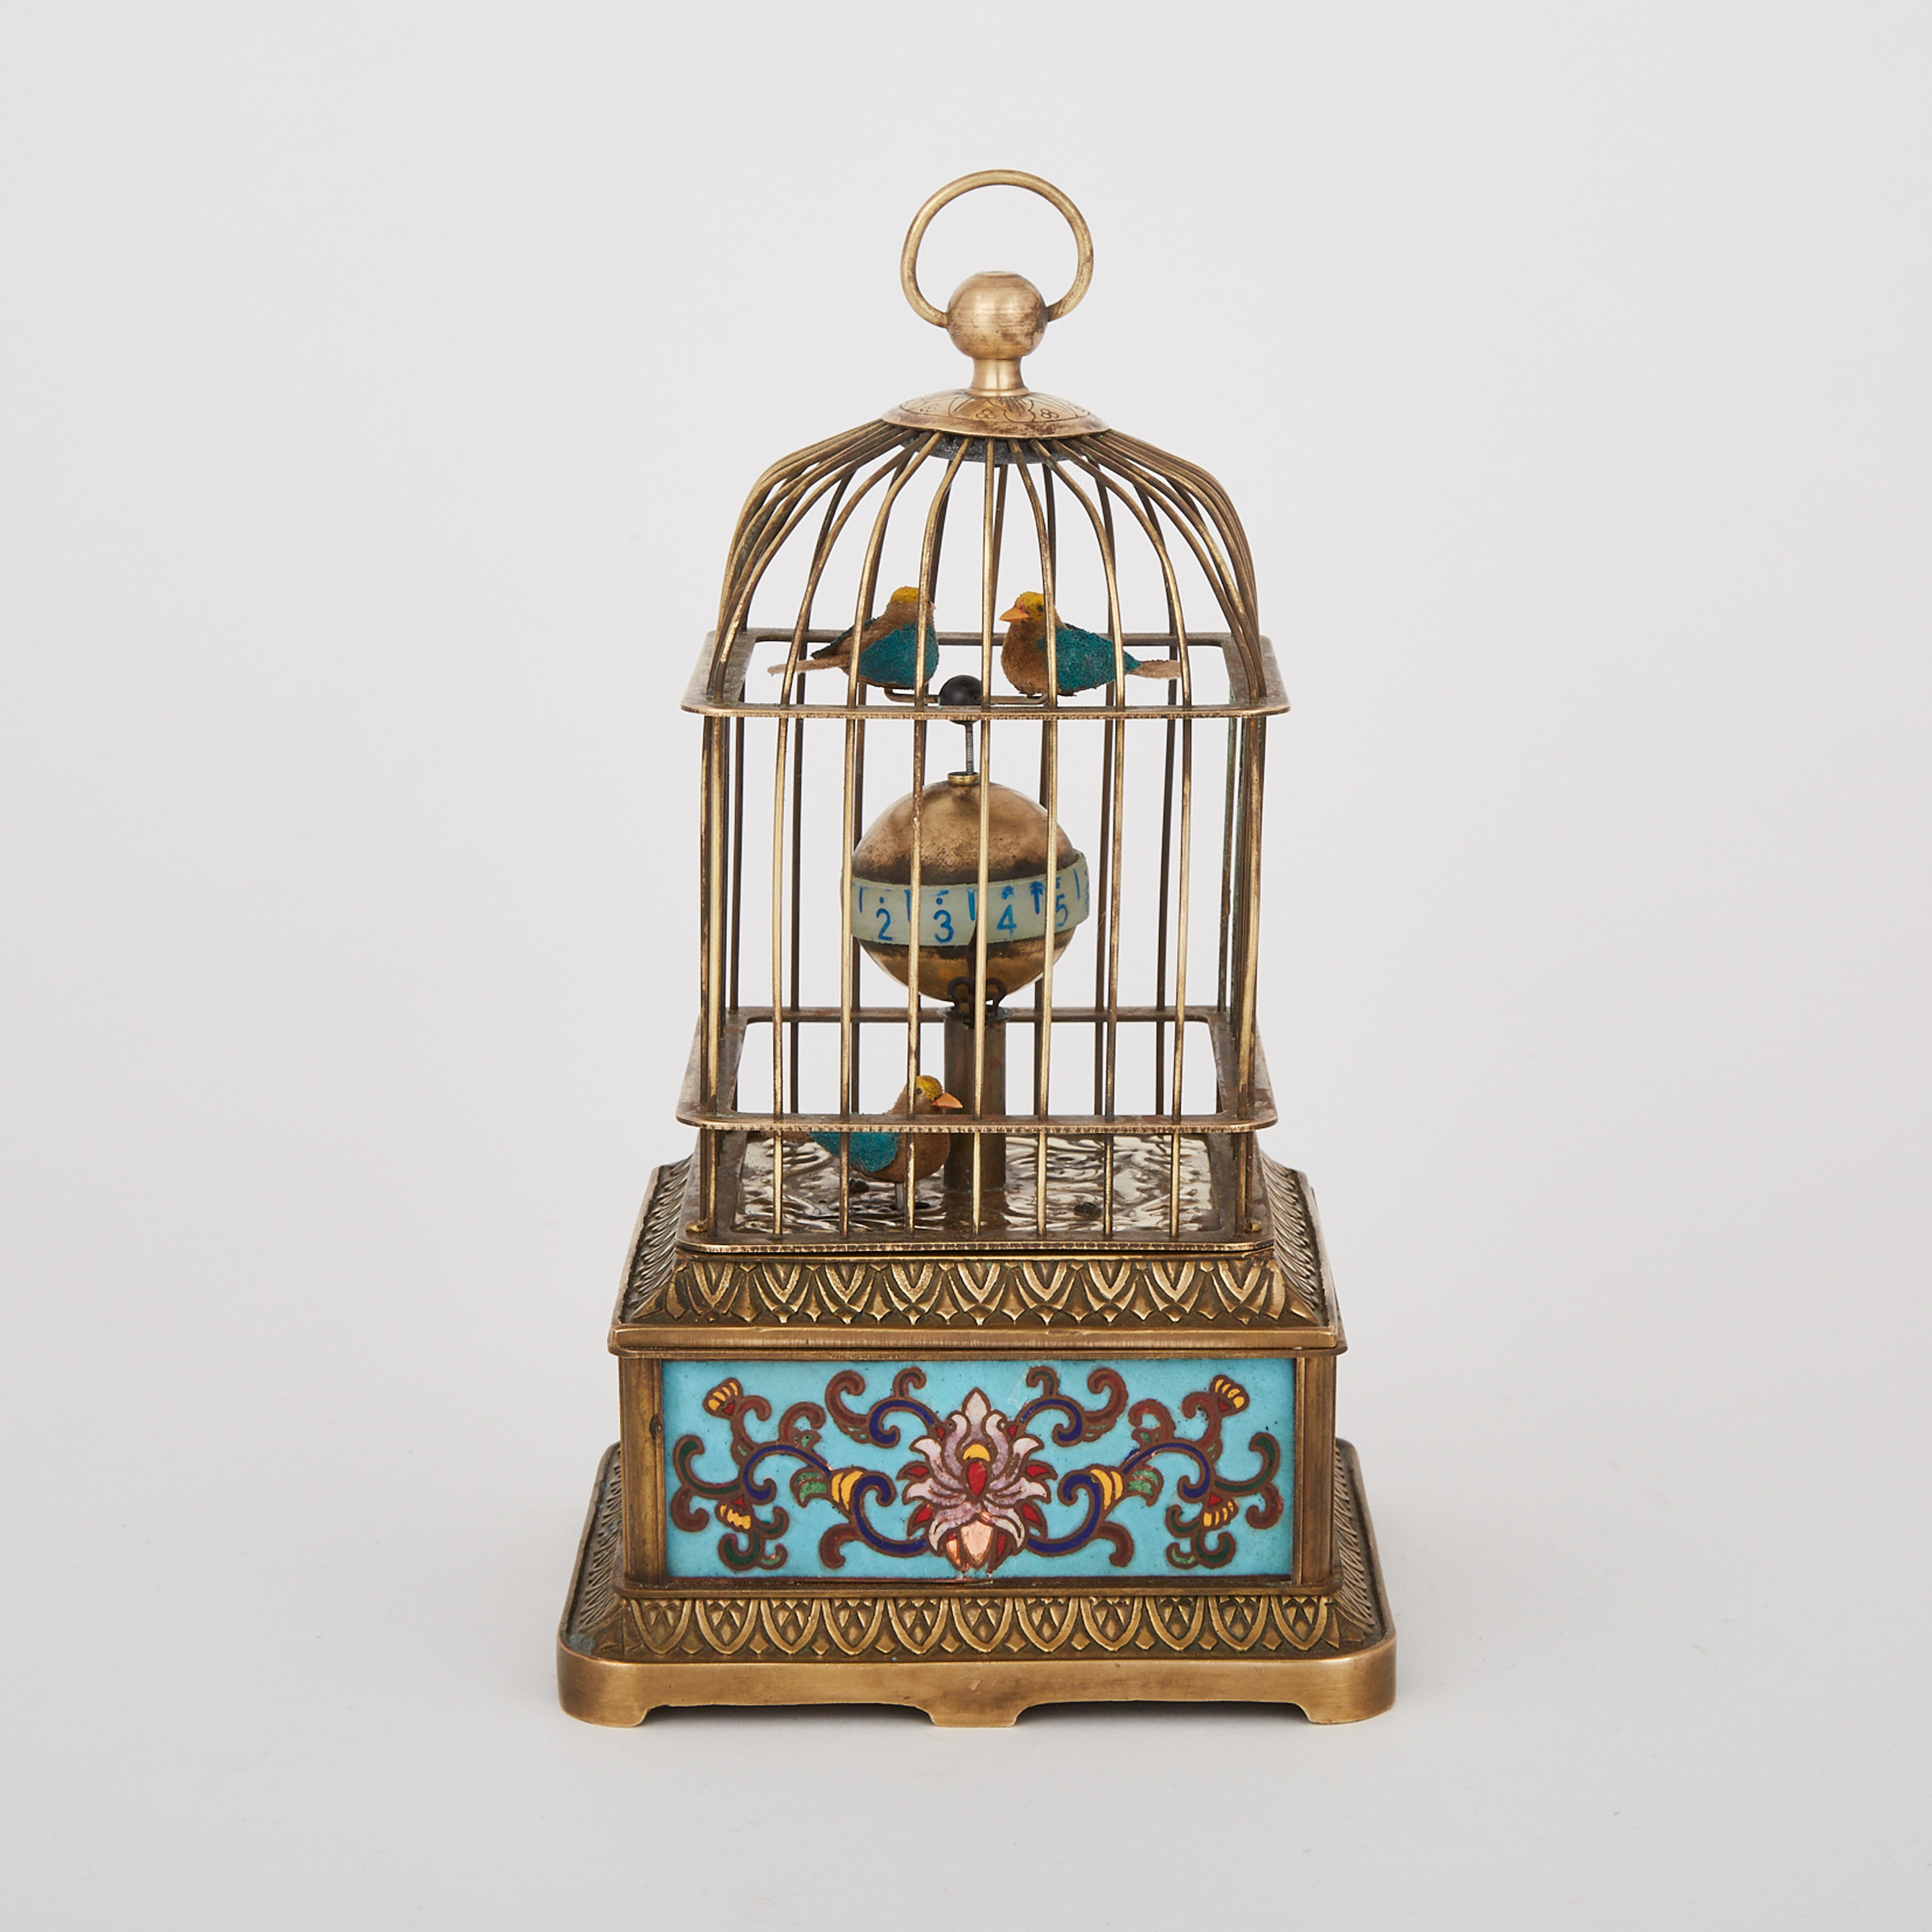 German Champlevé Enamelled Automaton Bird Cage Novelty Clock, early 20th century